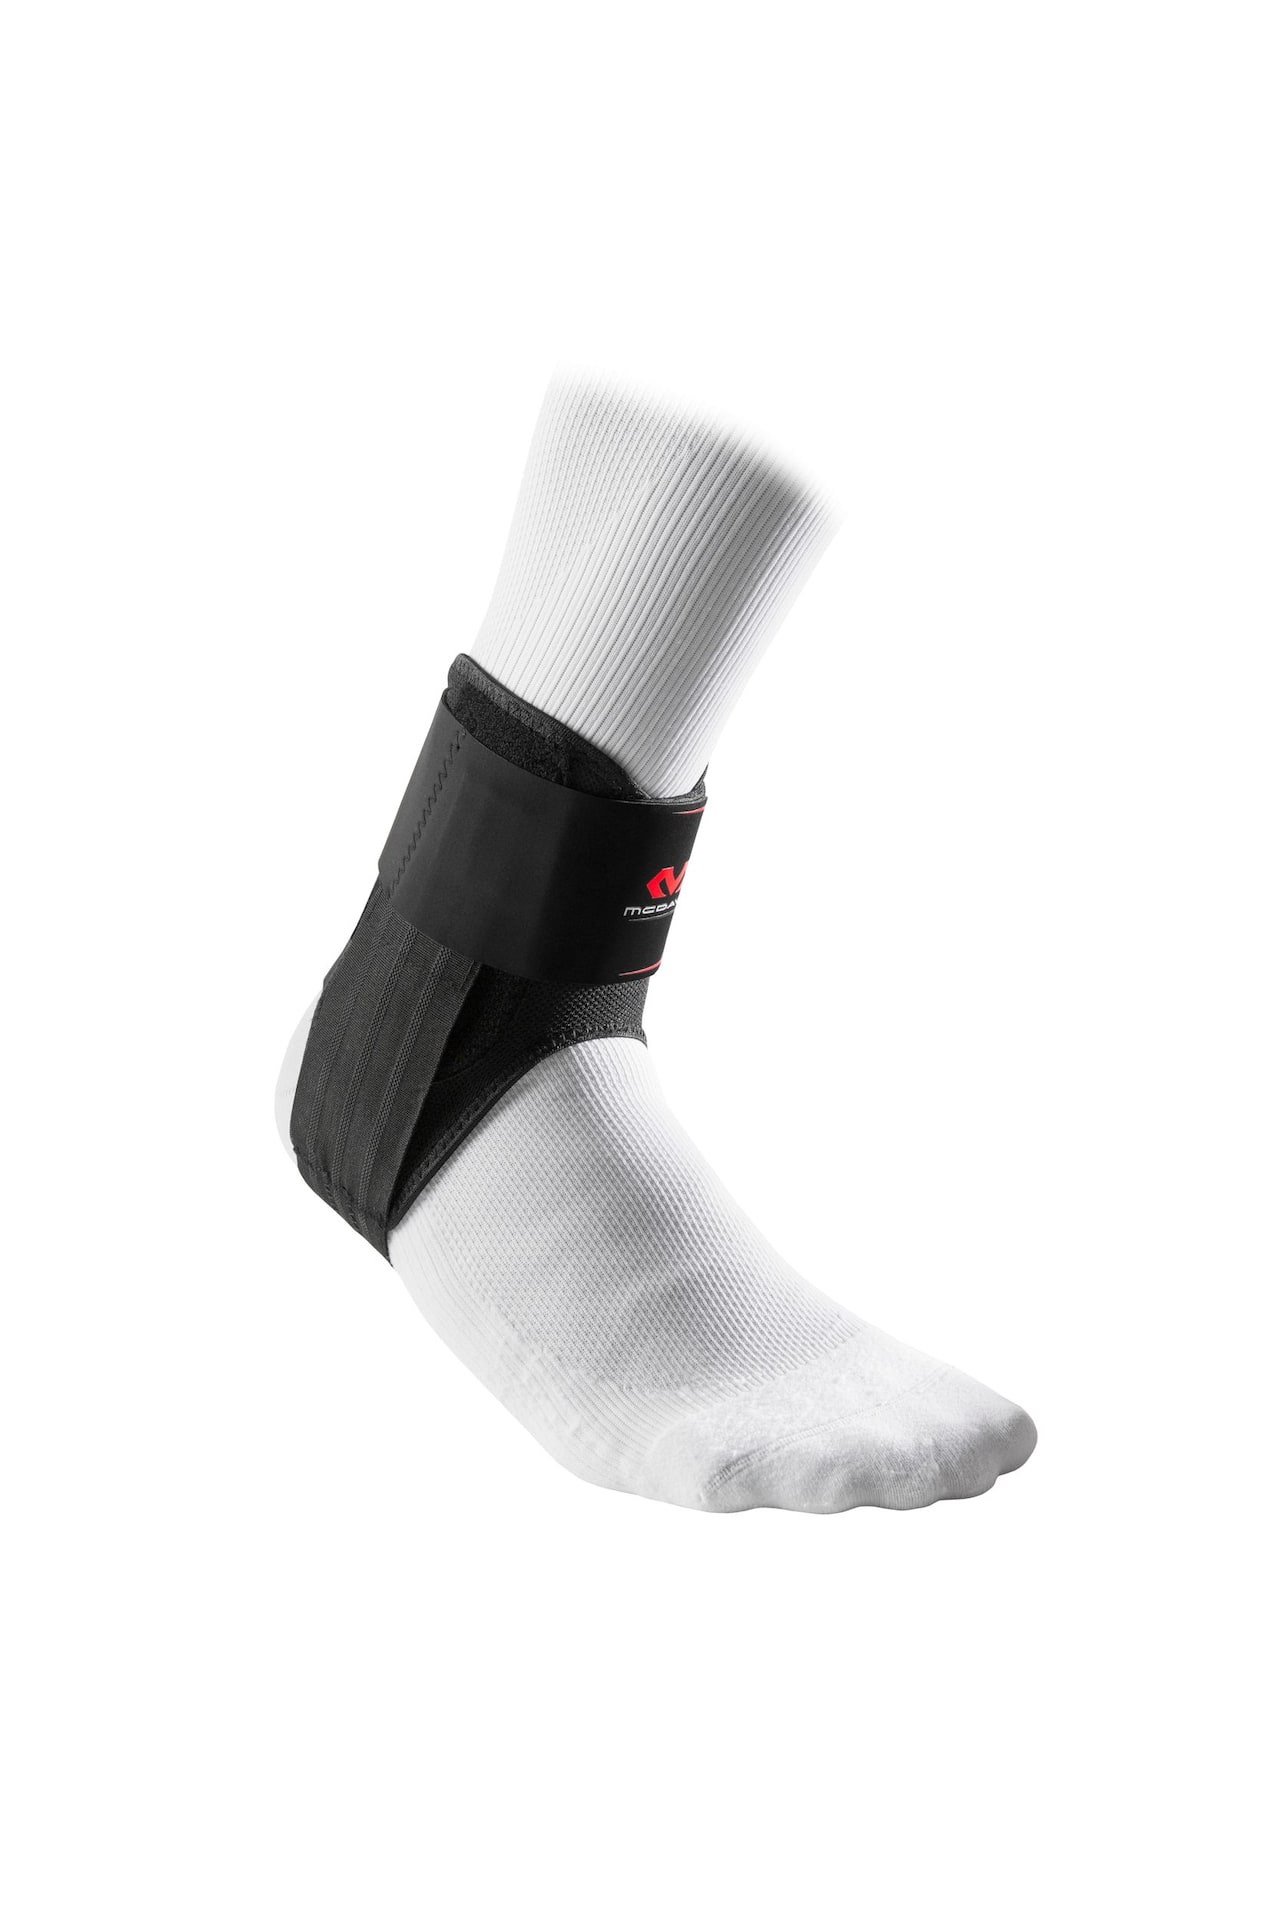 Ankle Compression, Ankle Supports